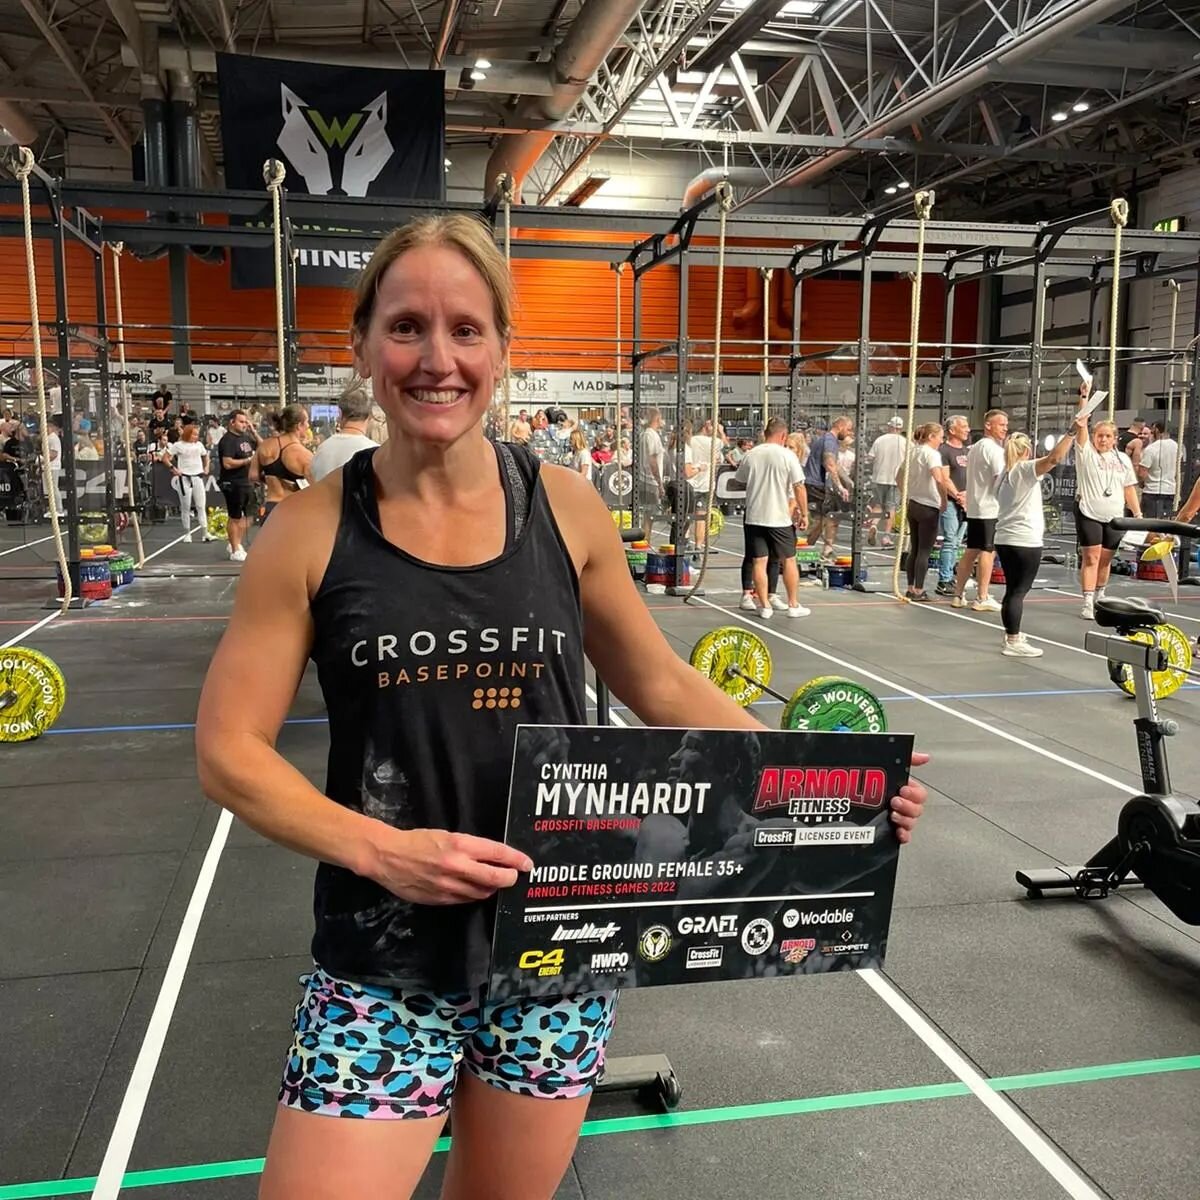 HUGE congratulations to Cynthia for her 2nd place finish at the Arnold Fitness Games 💪 what an amazing human! 🥳 Now for her second day in a row off to Double Impact to compete again. 

#arnoldfitnessgames2022